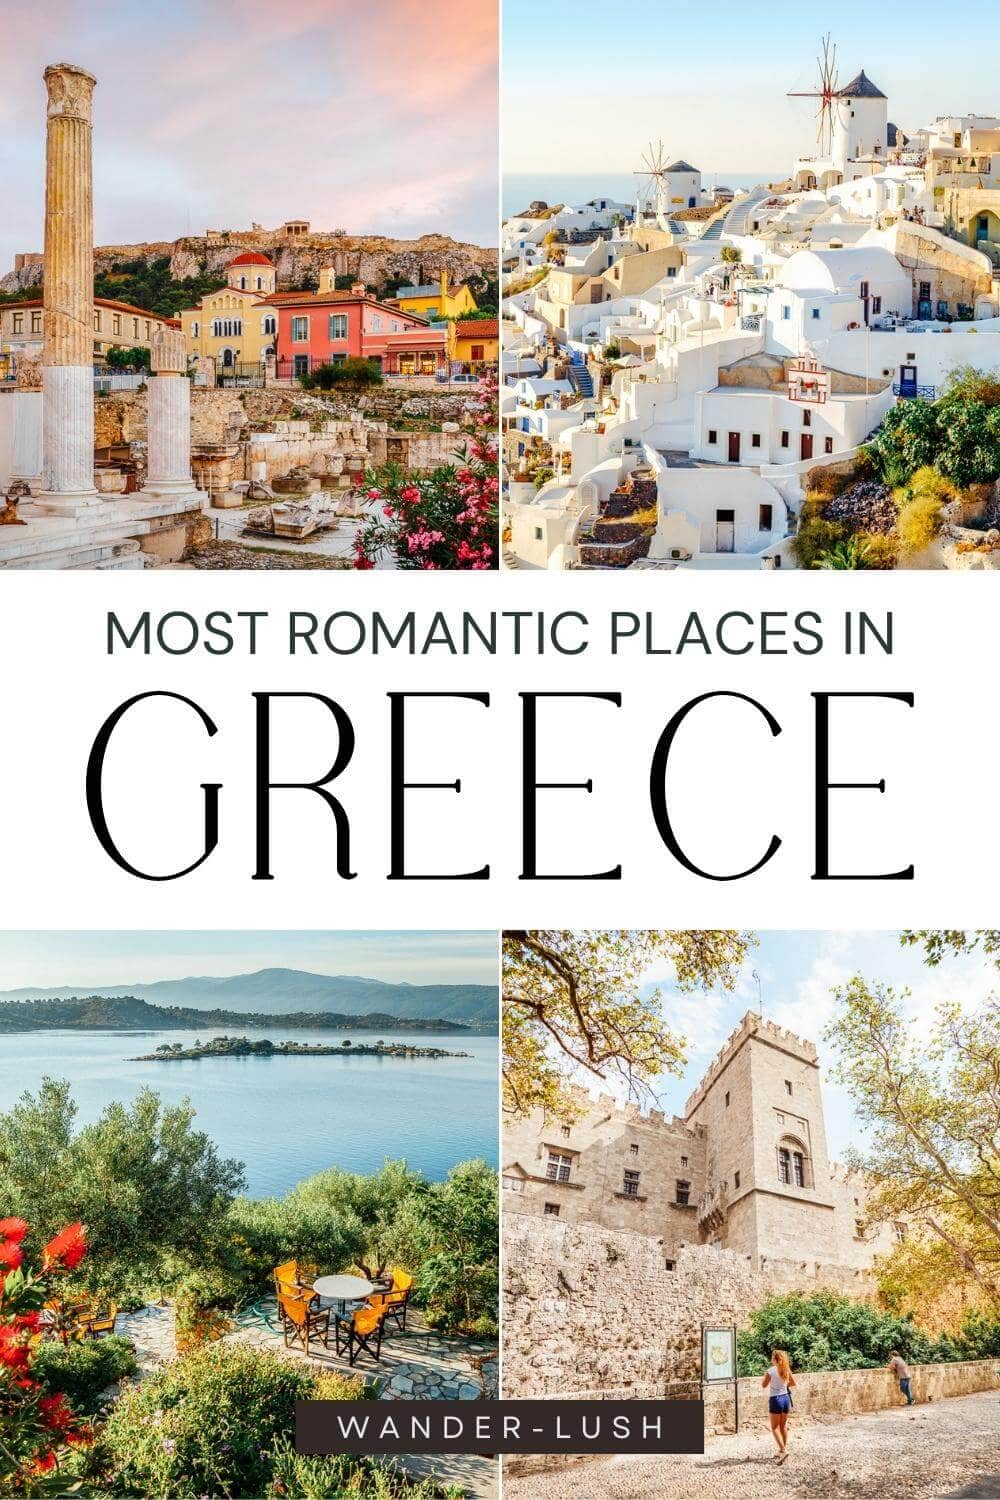 Most romantic places in Greece Pinterest graphic.